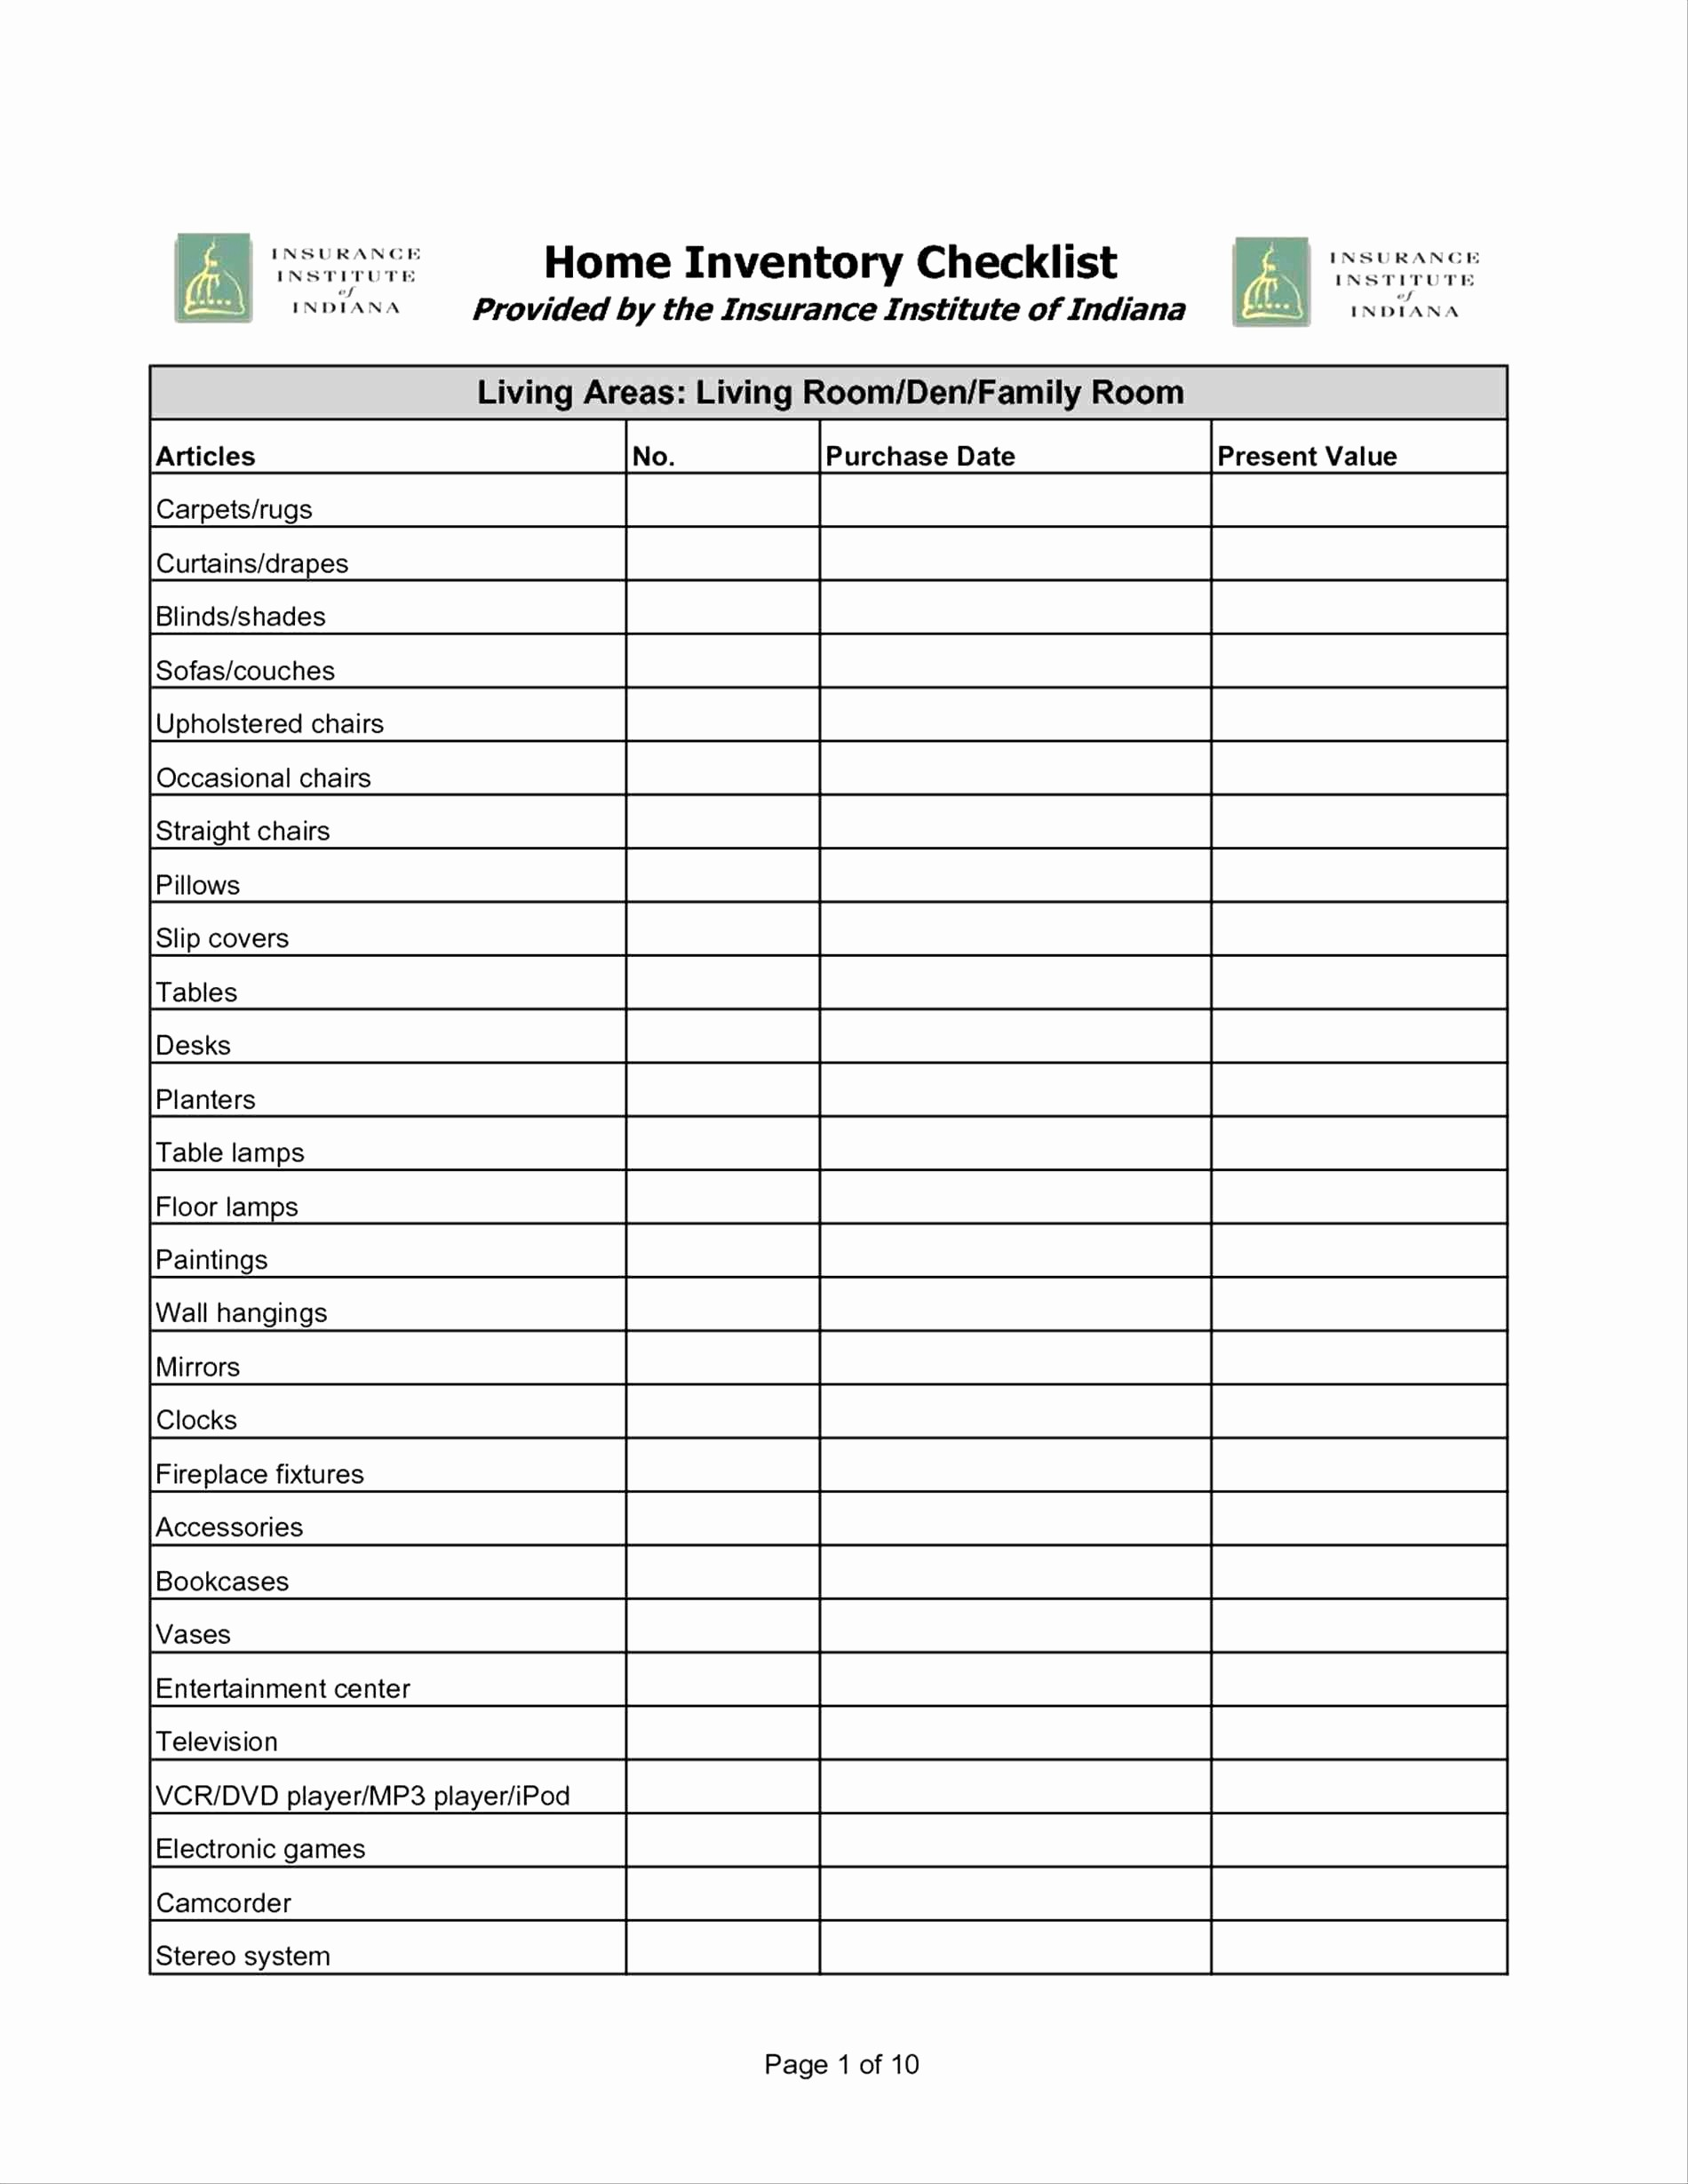 Home Inventory List Template Excel Bar Inventory Sheet Fresh It in Bar Inventory Templates